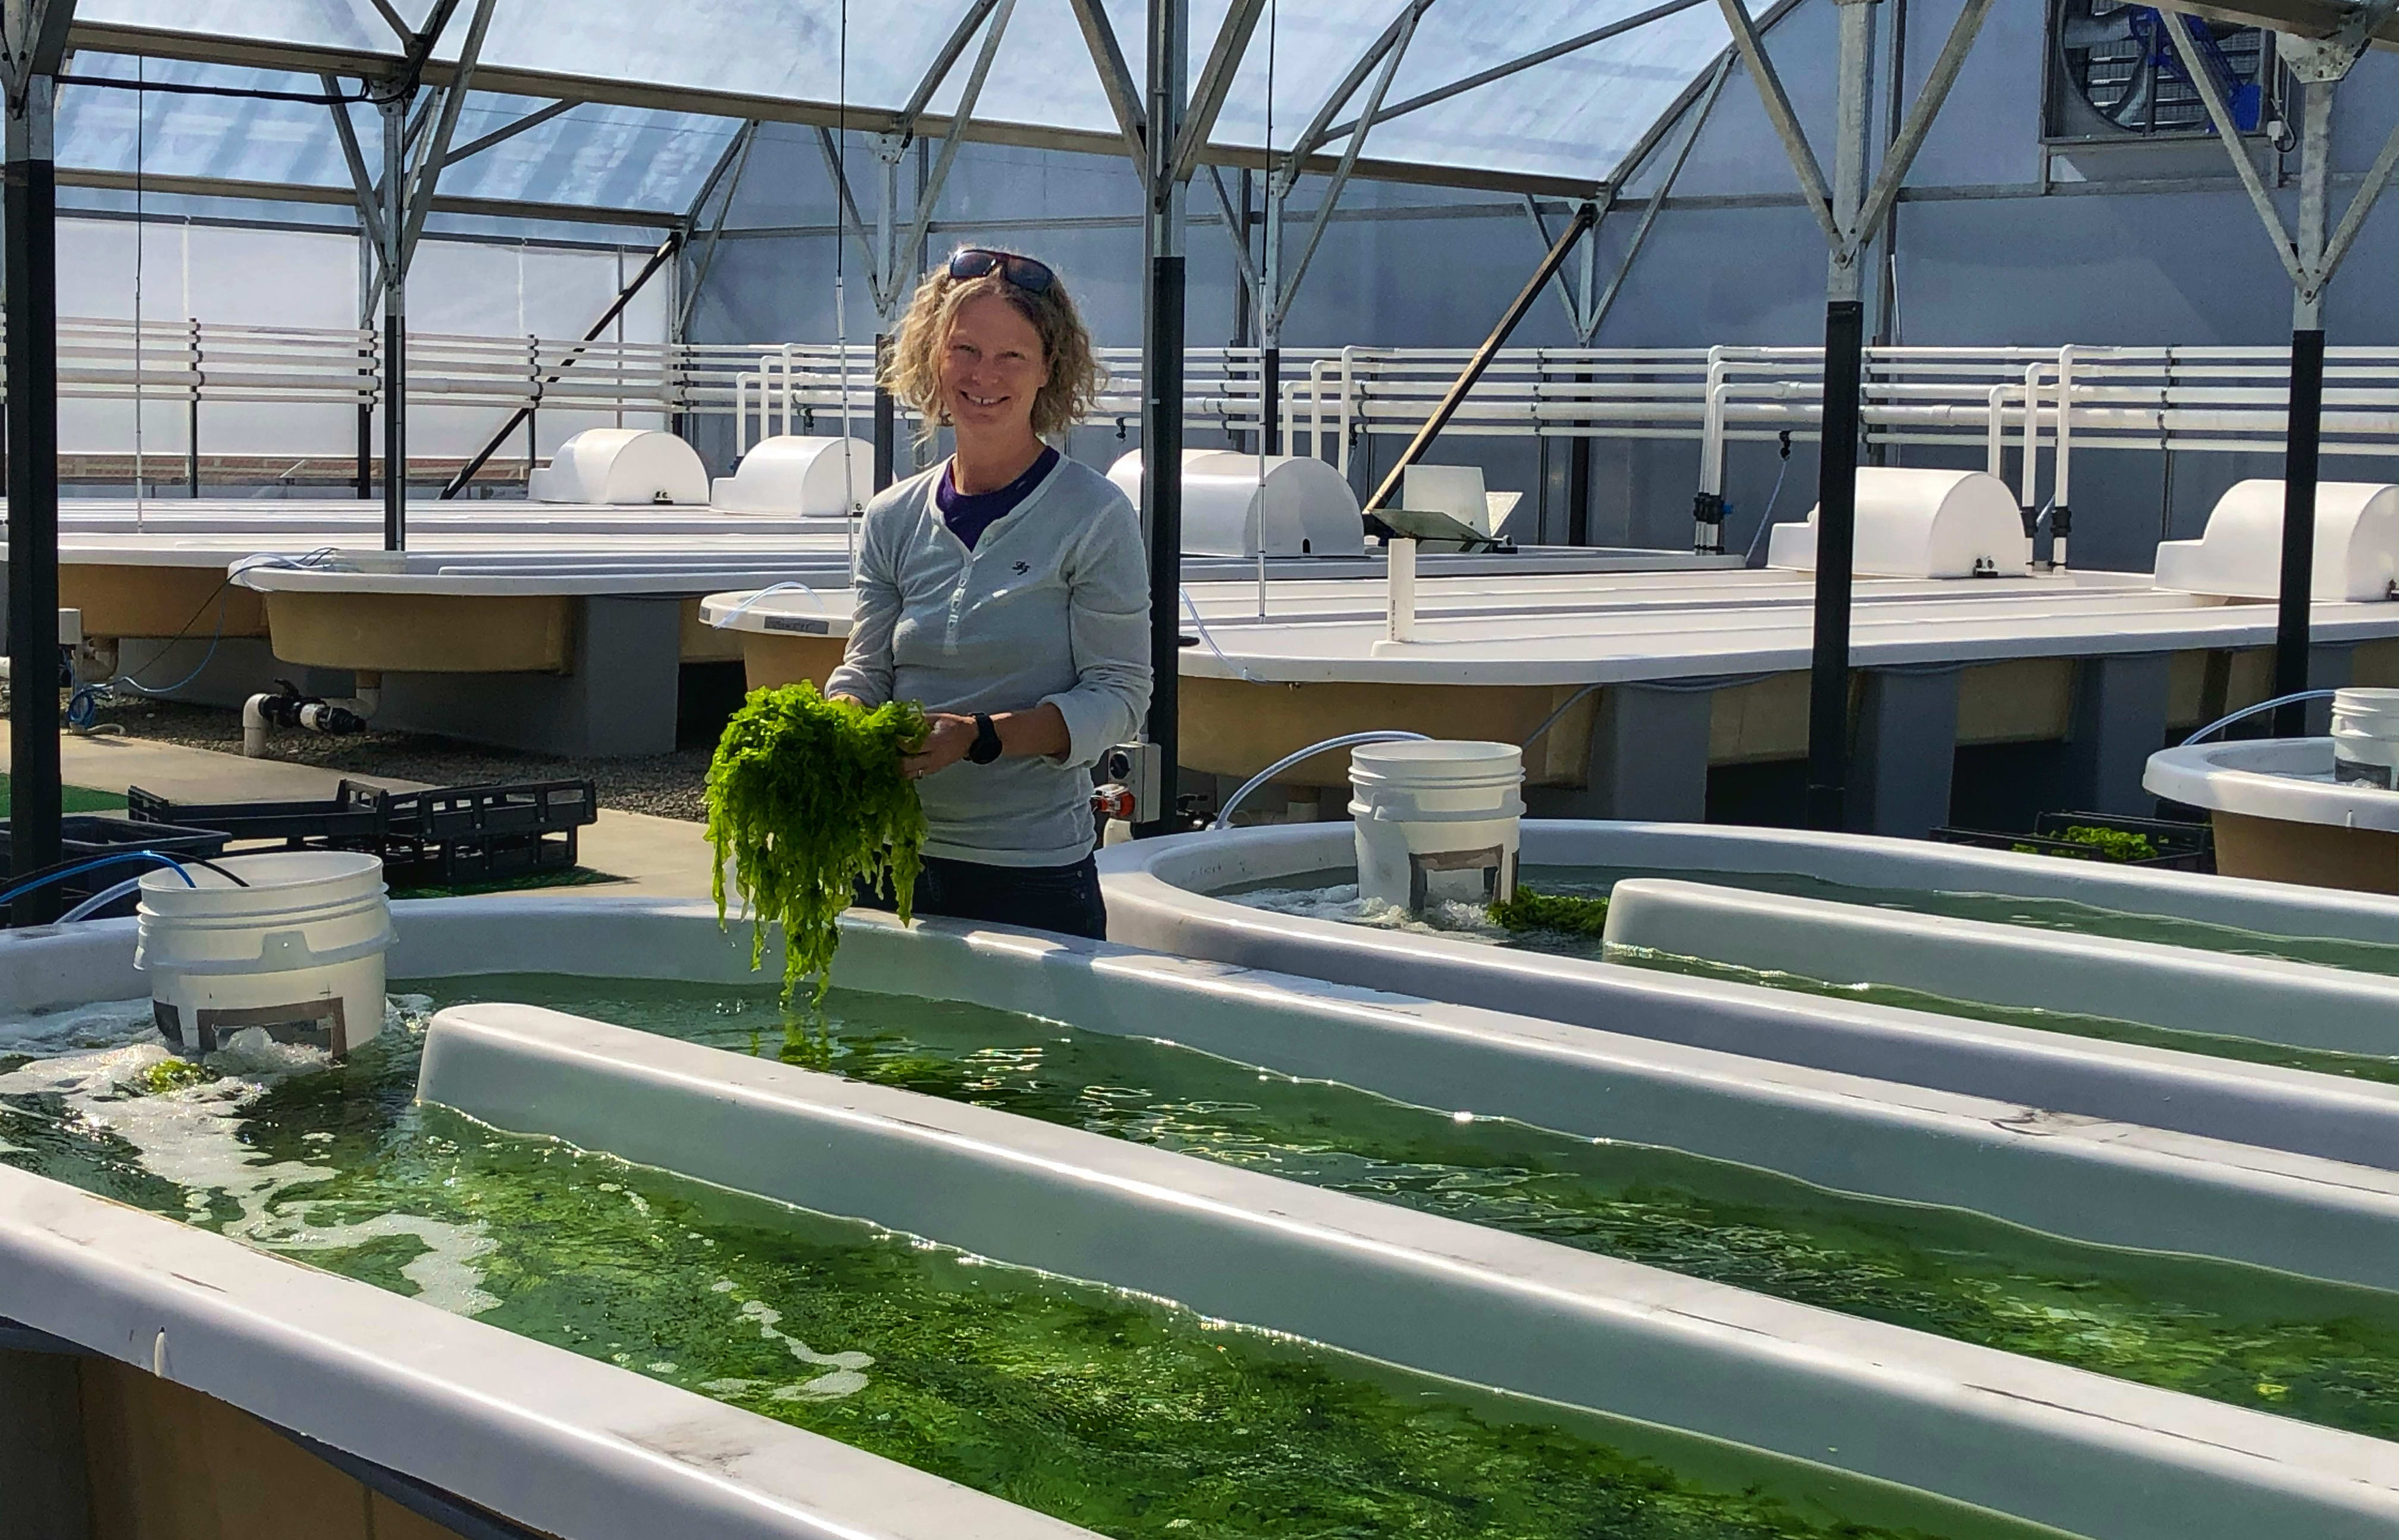 Dr. Marie Magnusson at the FARM. Marie holds up some green macroalgae in front of one of the large raceway baths that it is grown in at the facility at Sulphur Point.